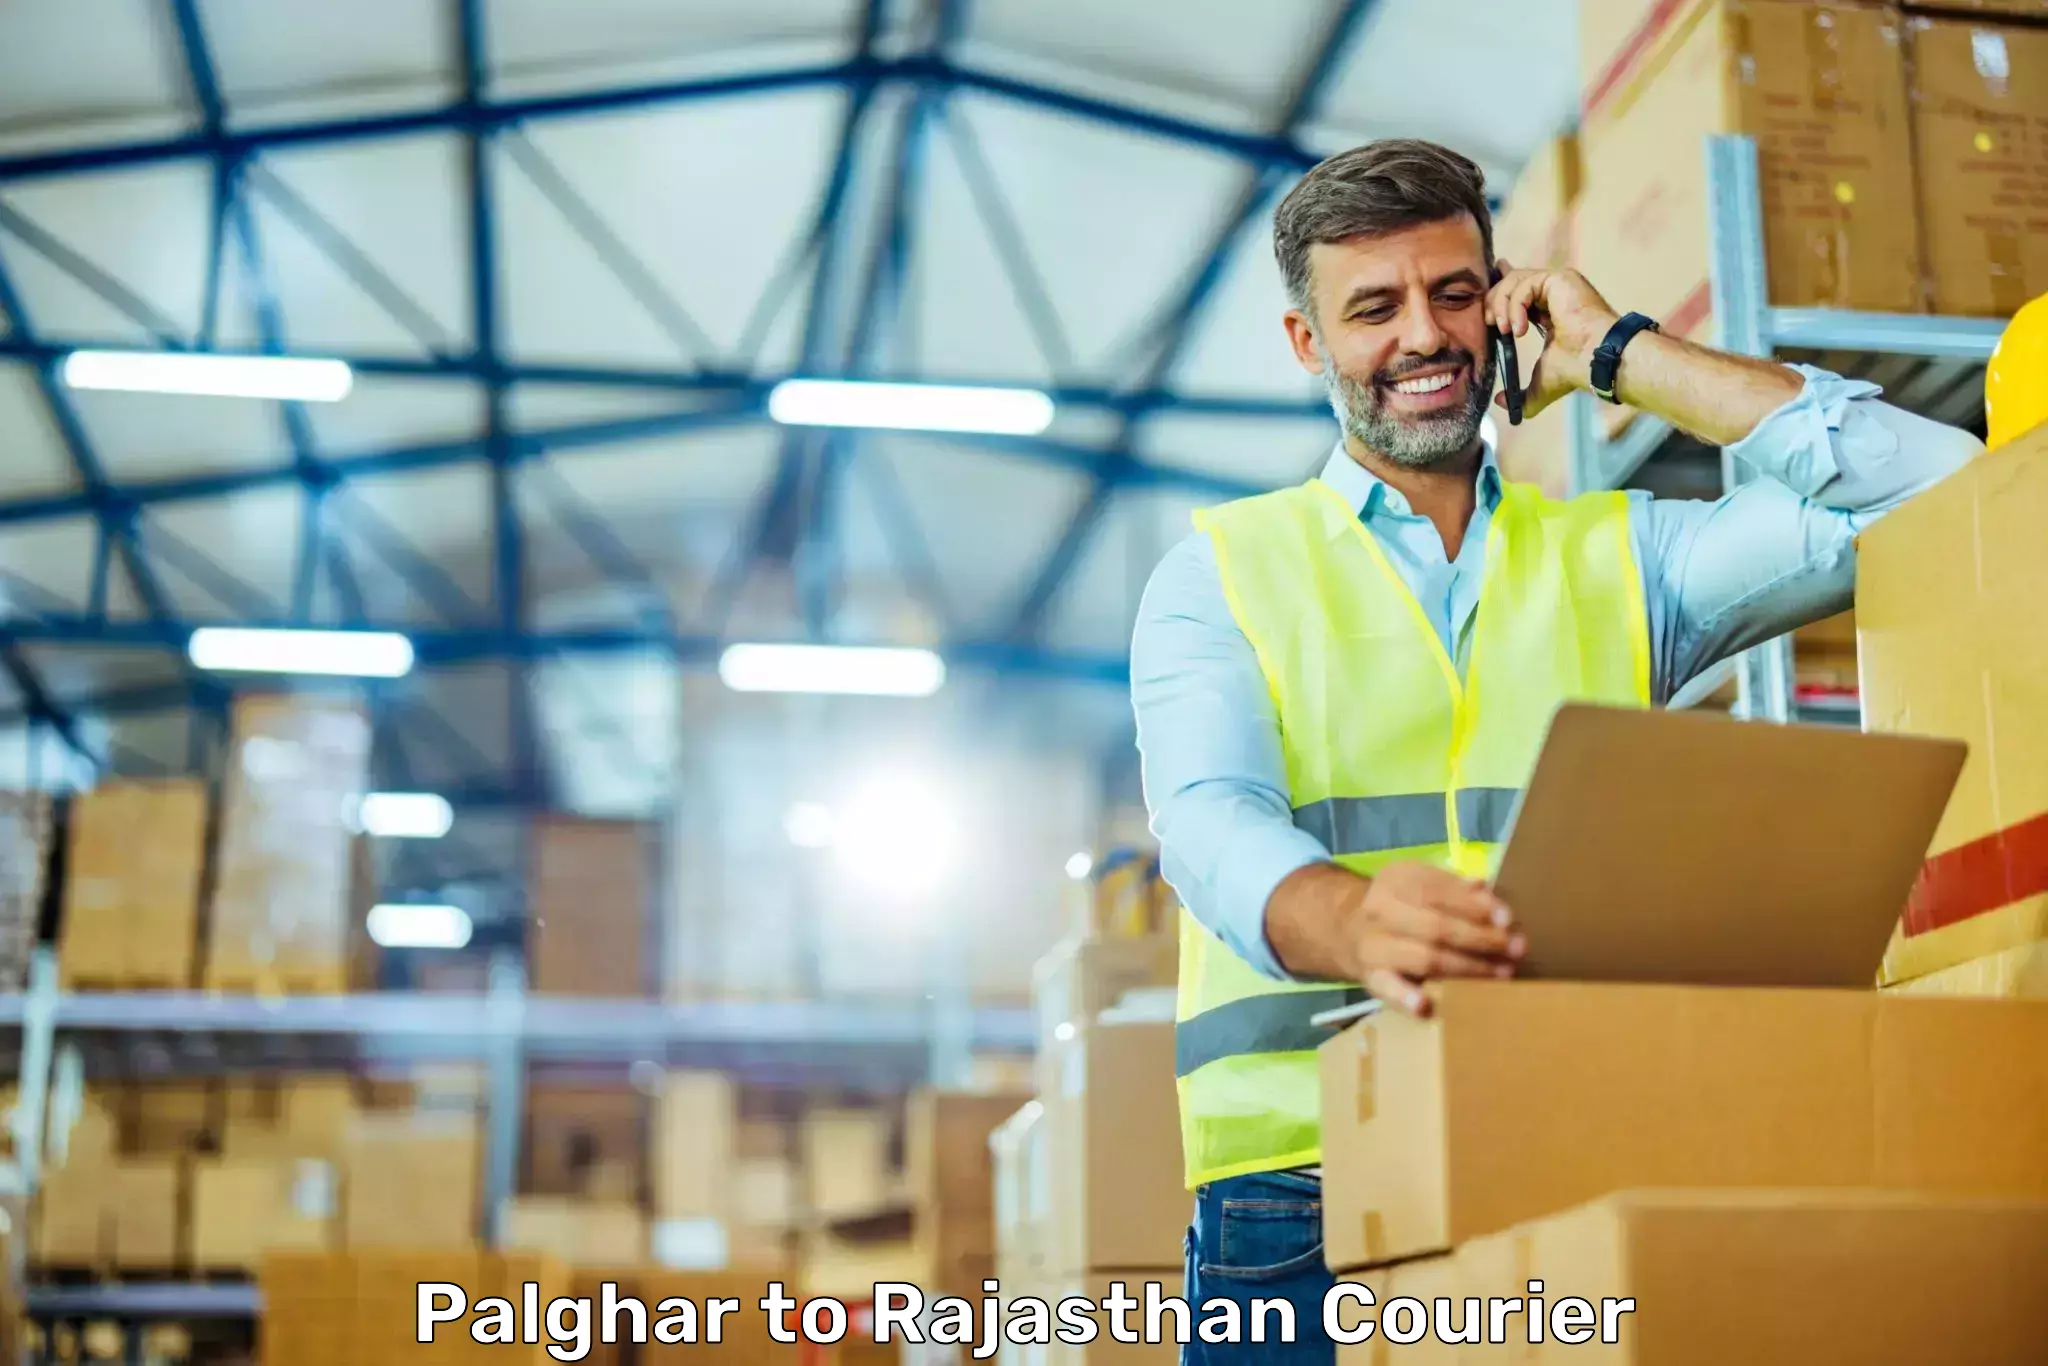 Cash on delivery service Palghar to Reodar